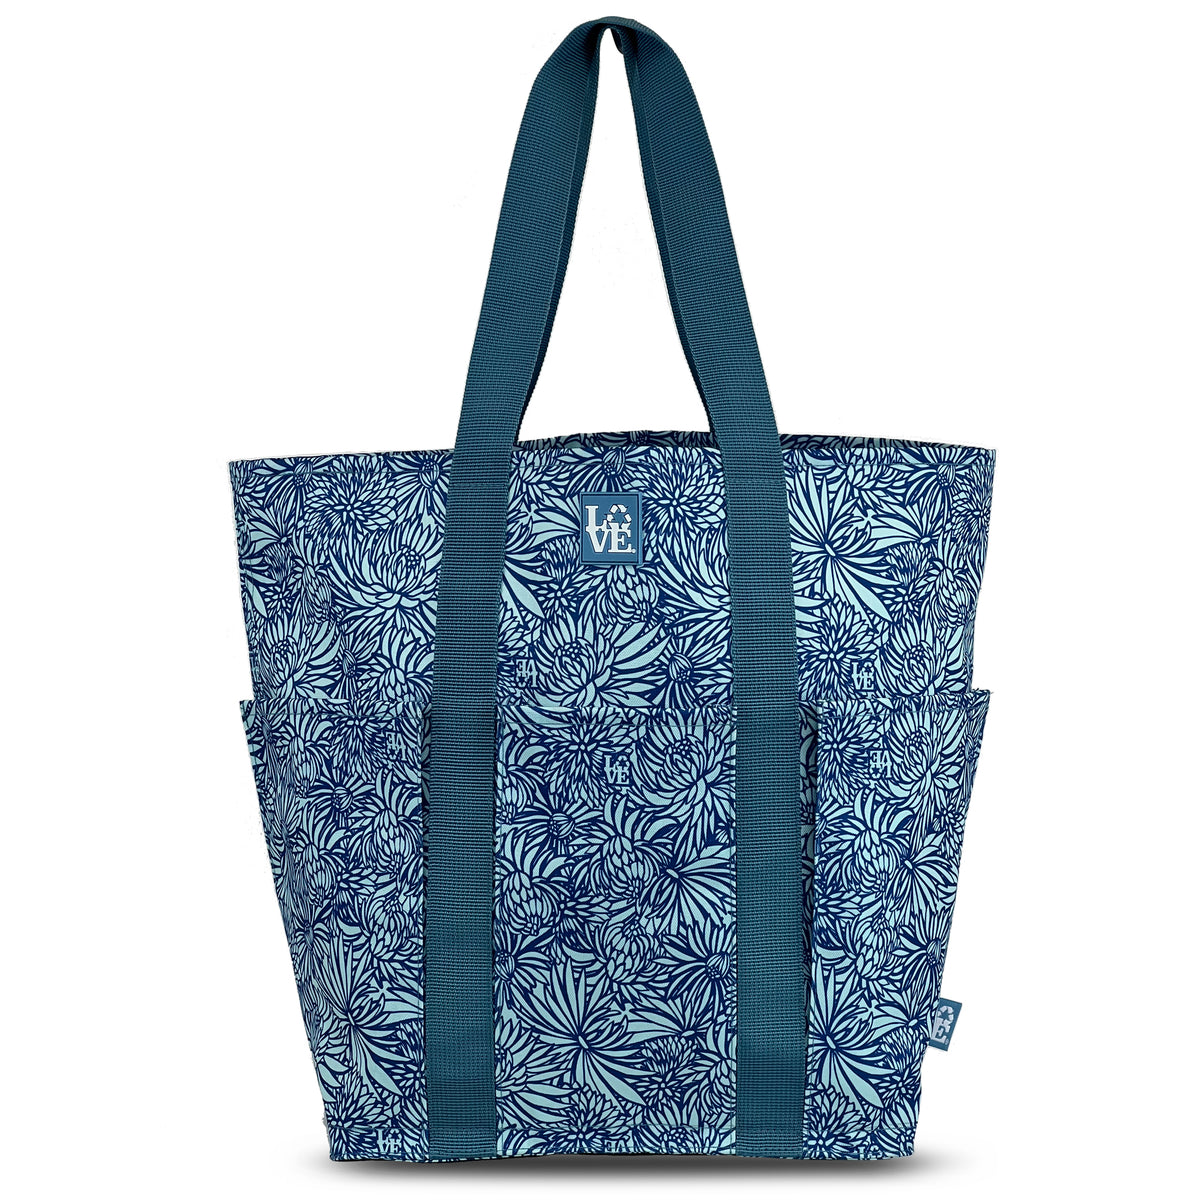 TRIO TOTE - MUMS THE WORD